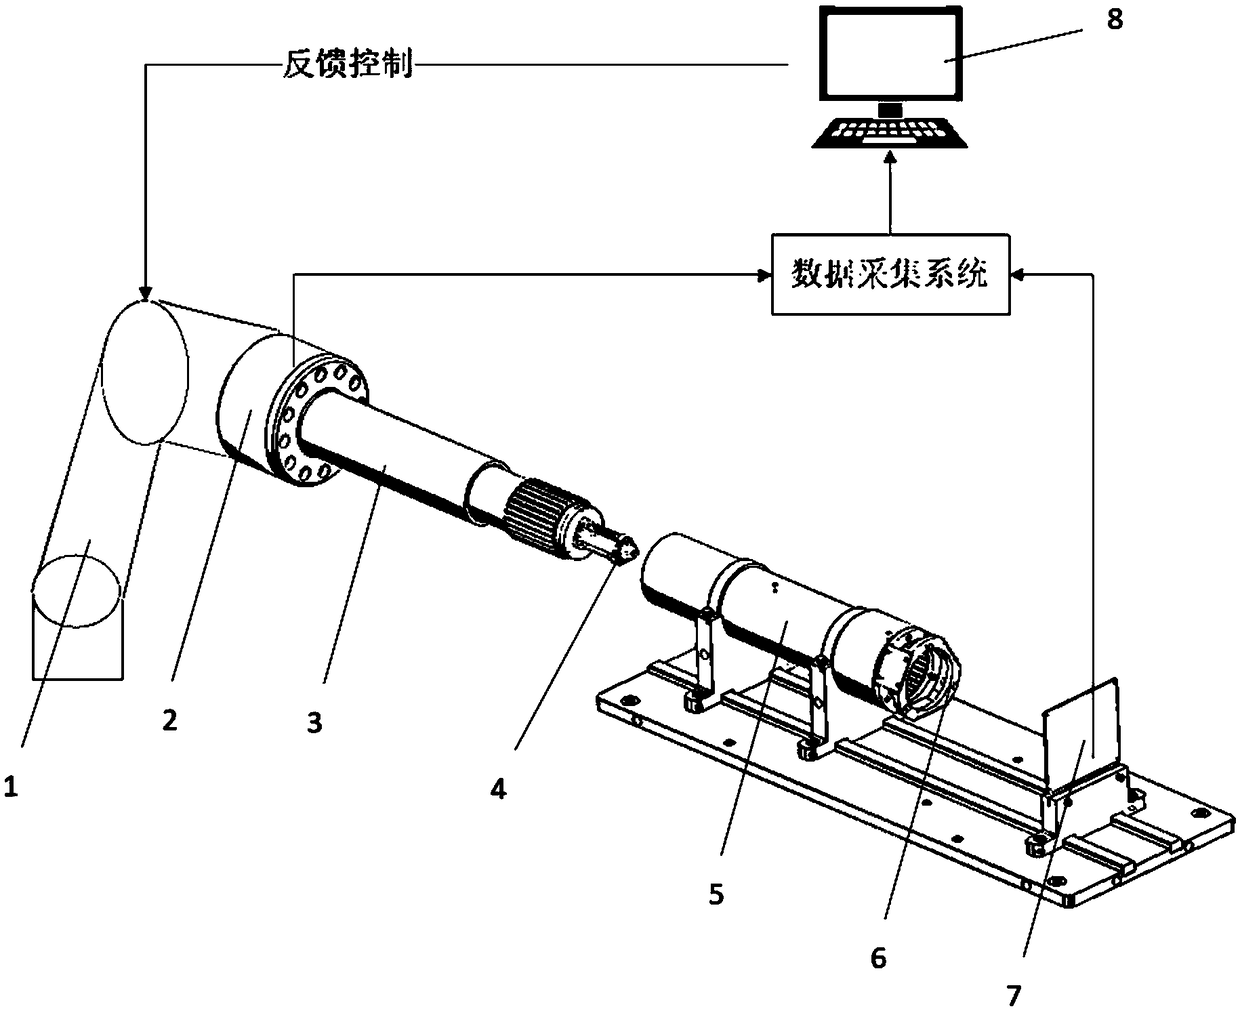 An automatic assembly method for shaft holes based on laser-assisted alignment